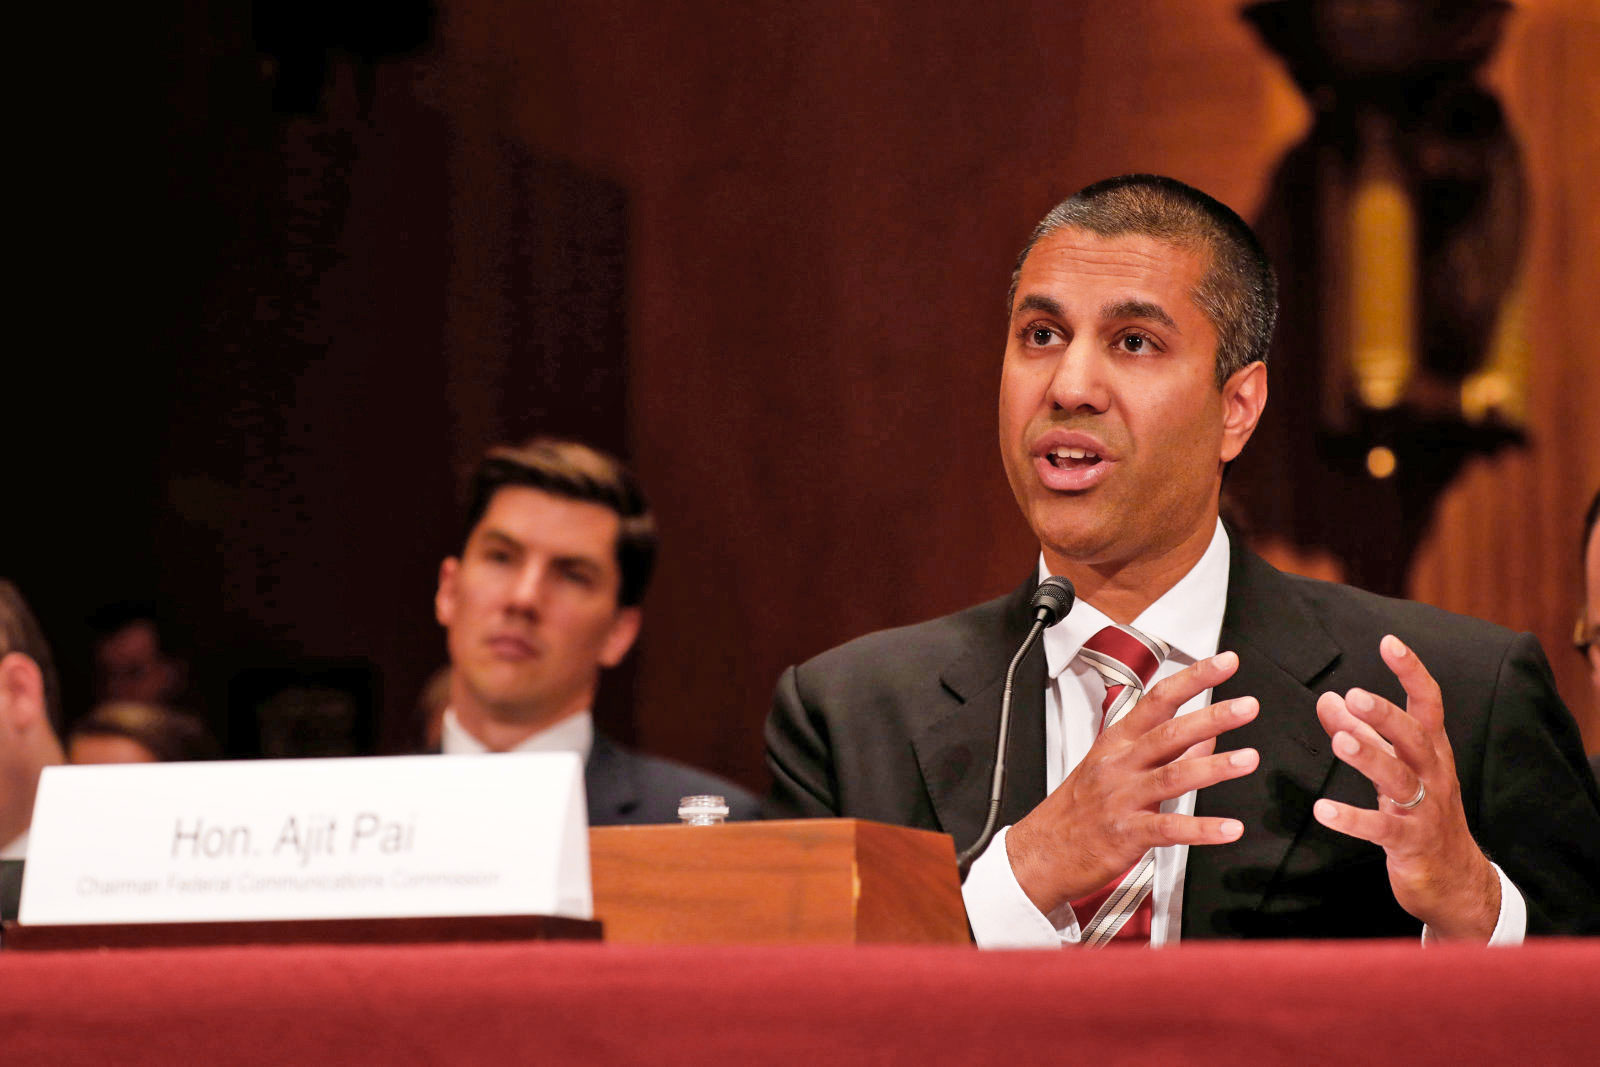 FCC says sharing DDoS attack details undermines security